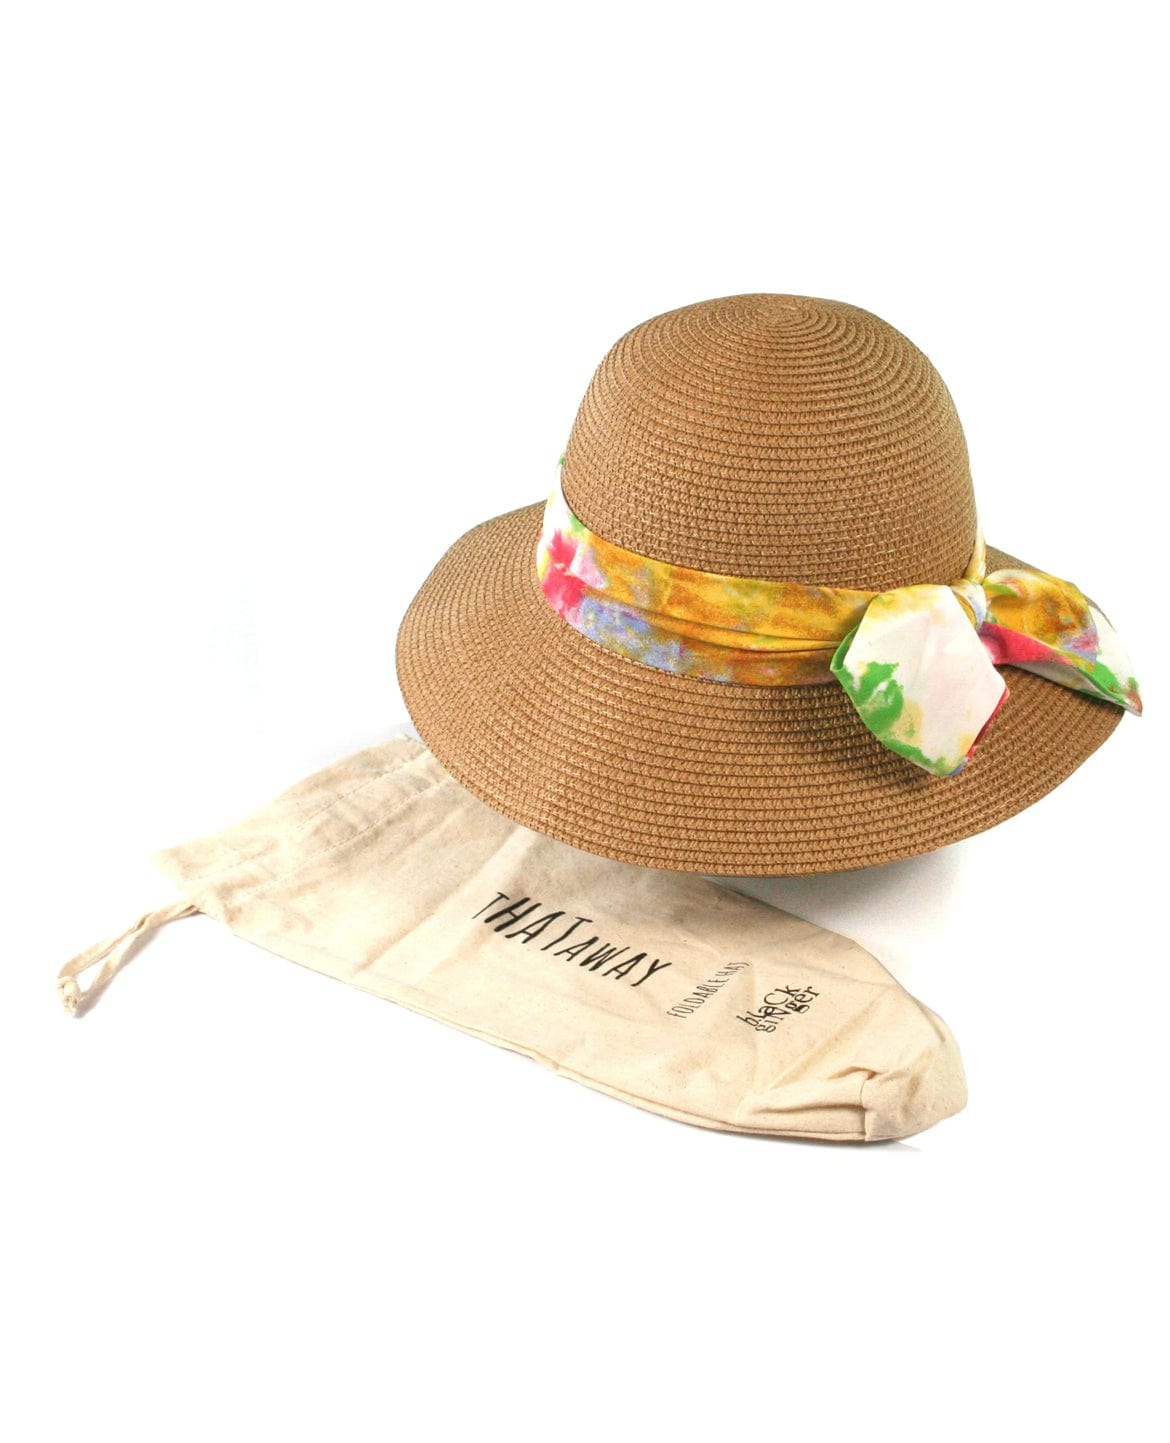 https://www.lusciousscarves.com/cdn/shop/files/lusciousscarves-hats-ladies-natural-foldable-sun-hat-with-multi-coloured-bow-rollable-and-packable-31057286267070.jpg?v=1682462001